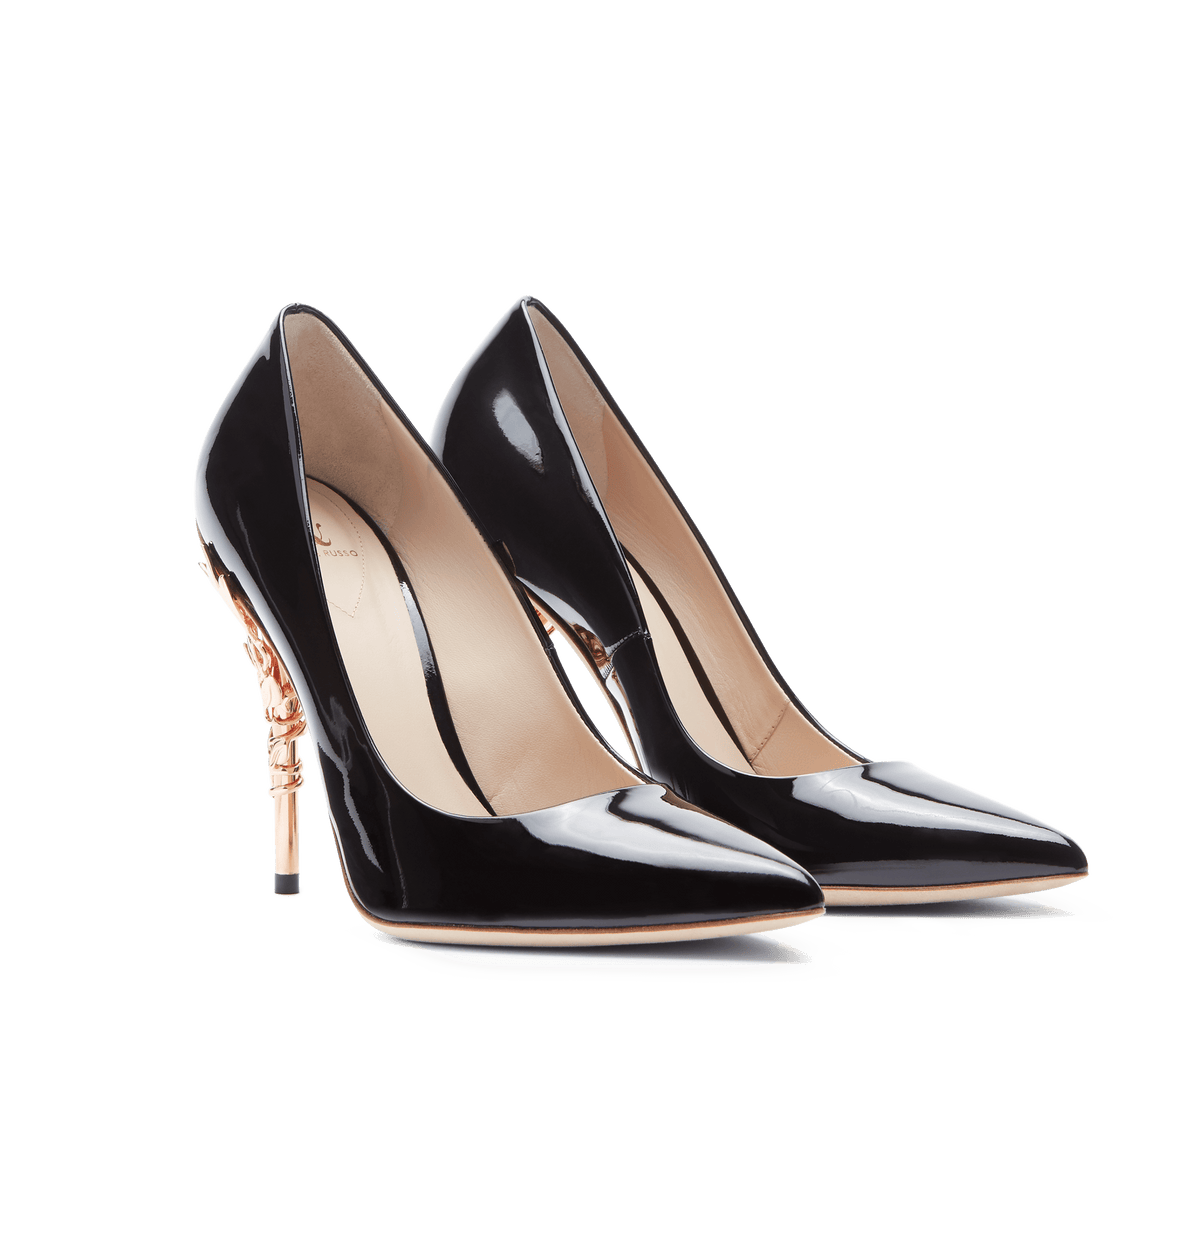 Black Patent Leather Eden Heels with Rose Gold Leaves